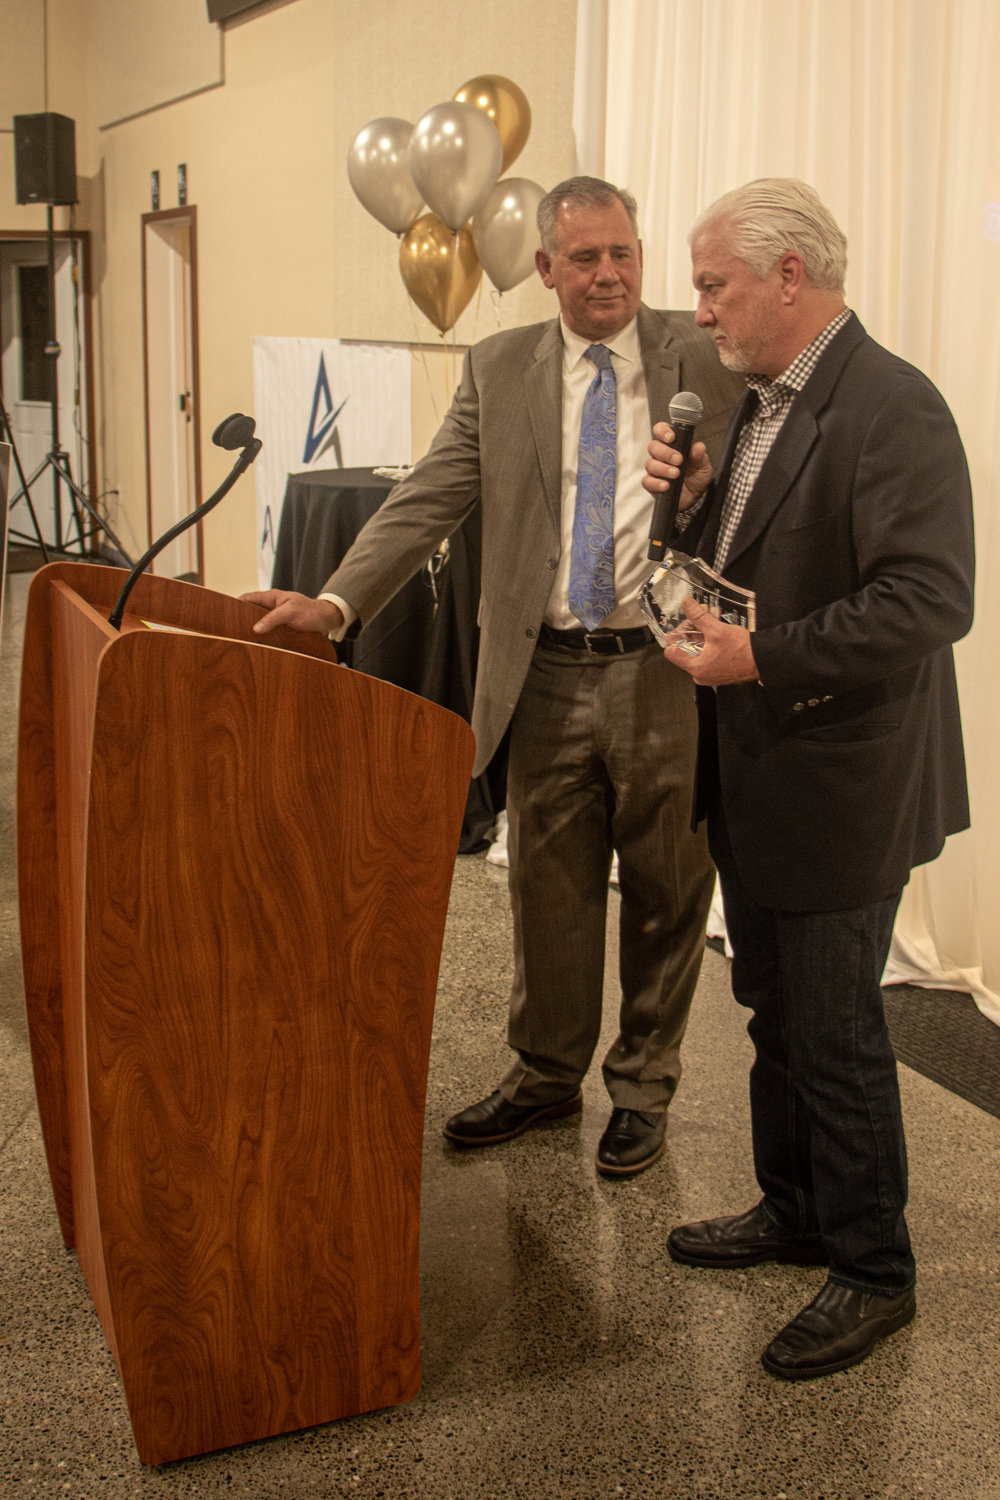 Port of Chehalis commissioner Paul Ericson recieves the Gail & Carolyn Shaw Industry award during the Economic Alliance of Lewis County's 40th annual banquet at Jesters Auto Museum on Friday night.